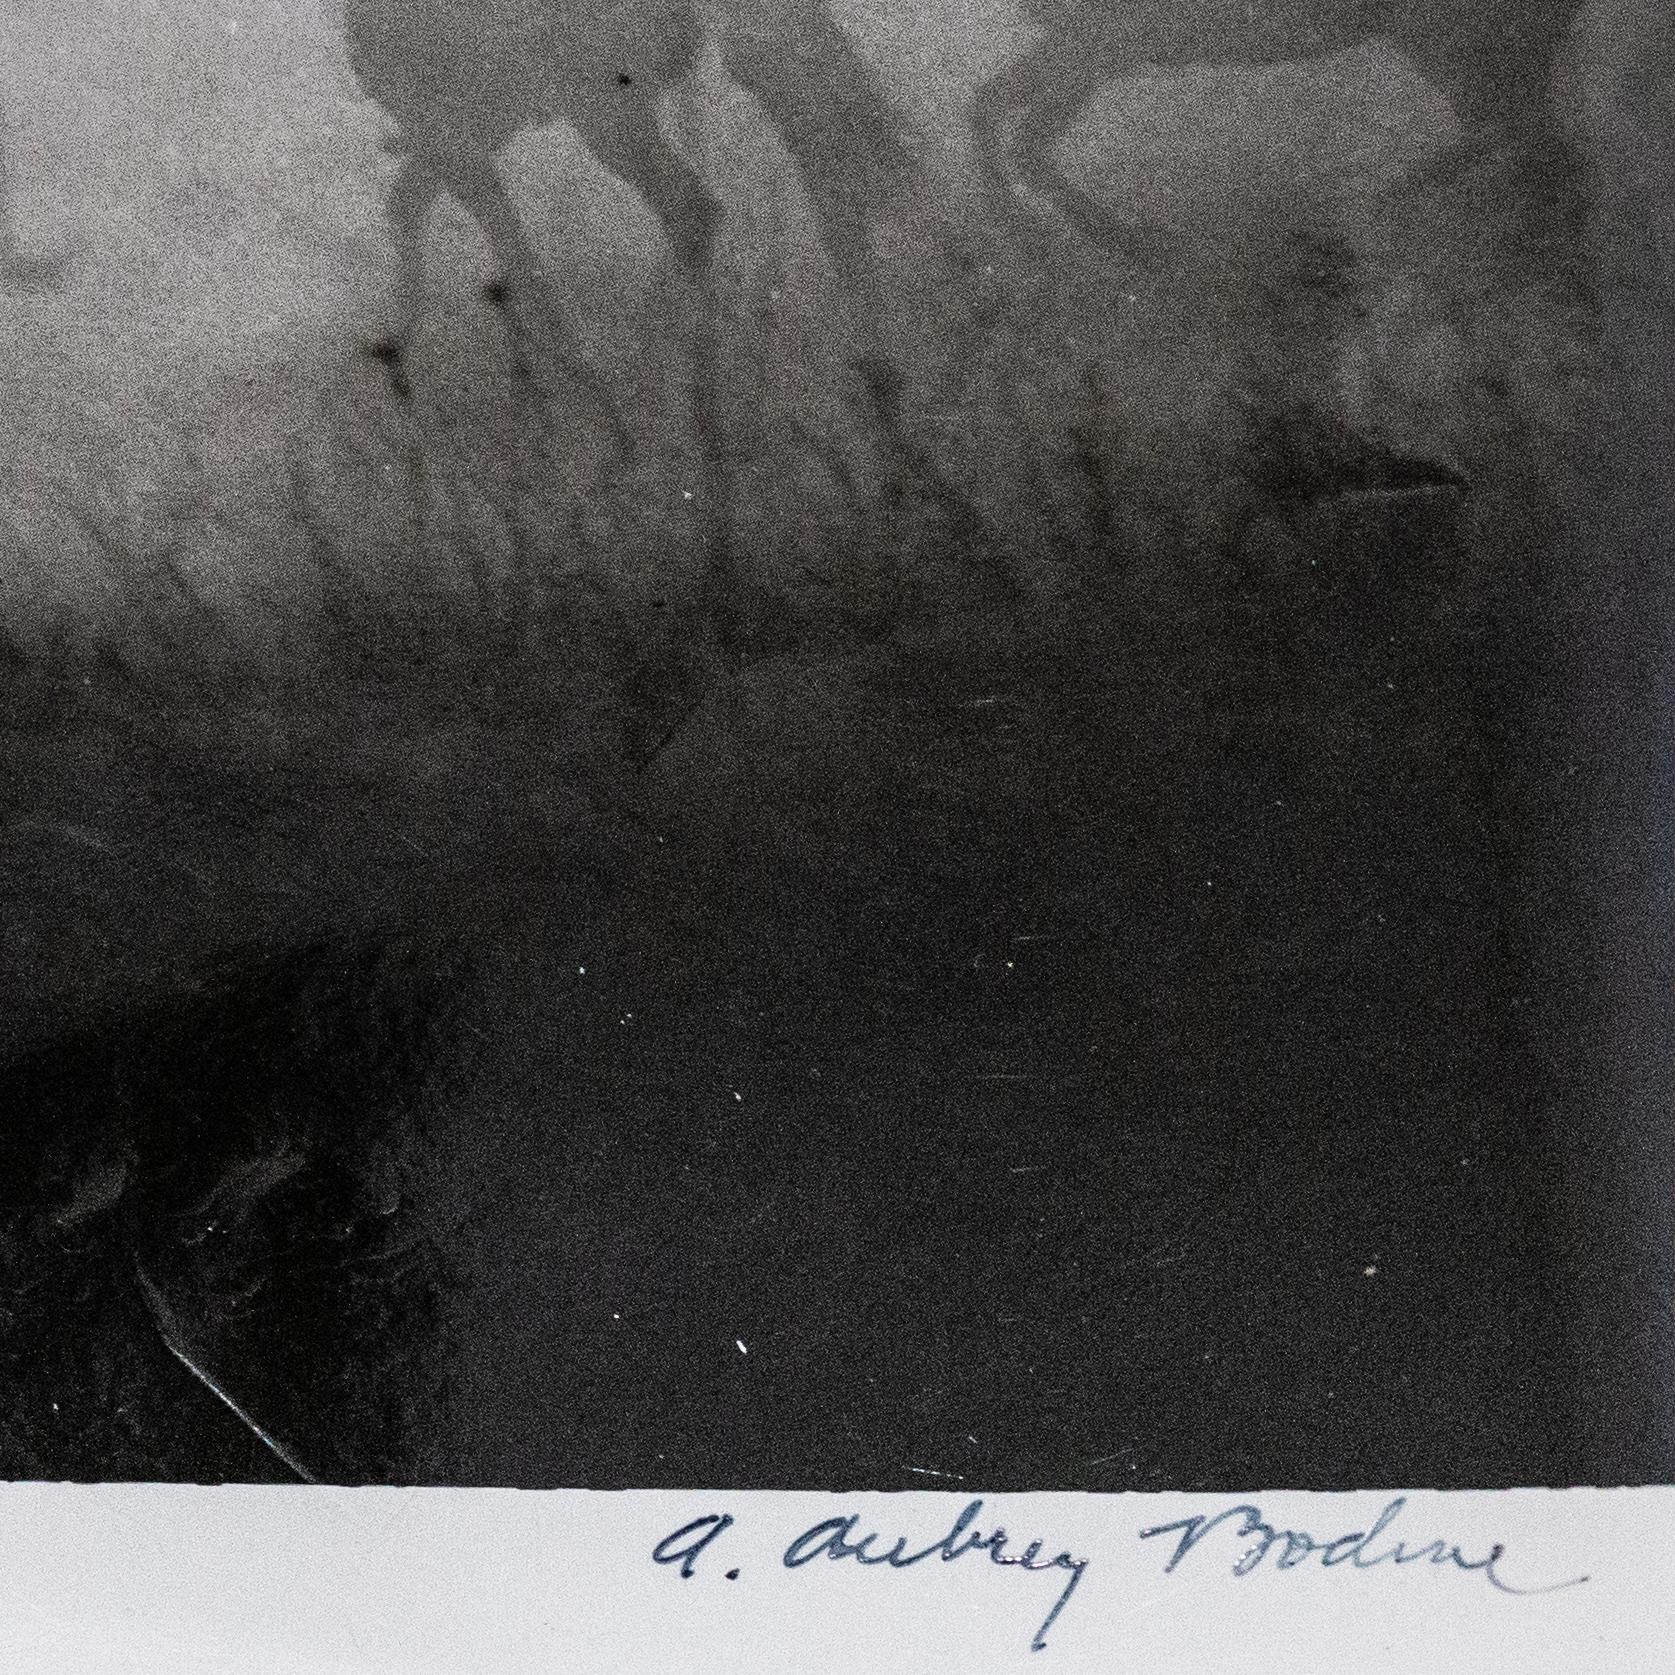 A. Aubrey Bodine (American, 1906-1970). 'Early Morning Charge', 1943. Gelatin silver print, signed lower right in pen and stamped to verso with Image ID # in pencil.

Regarded as one of the finest pictorialists of the 20th century, his pictures were